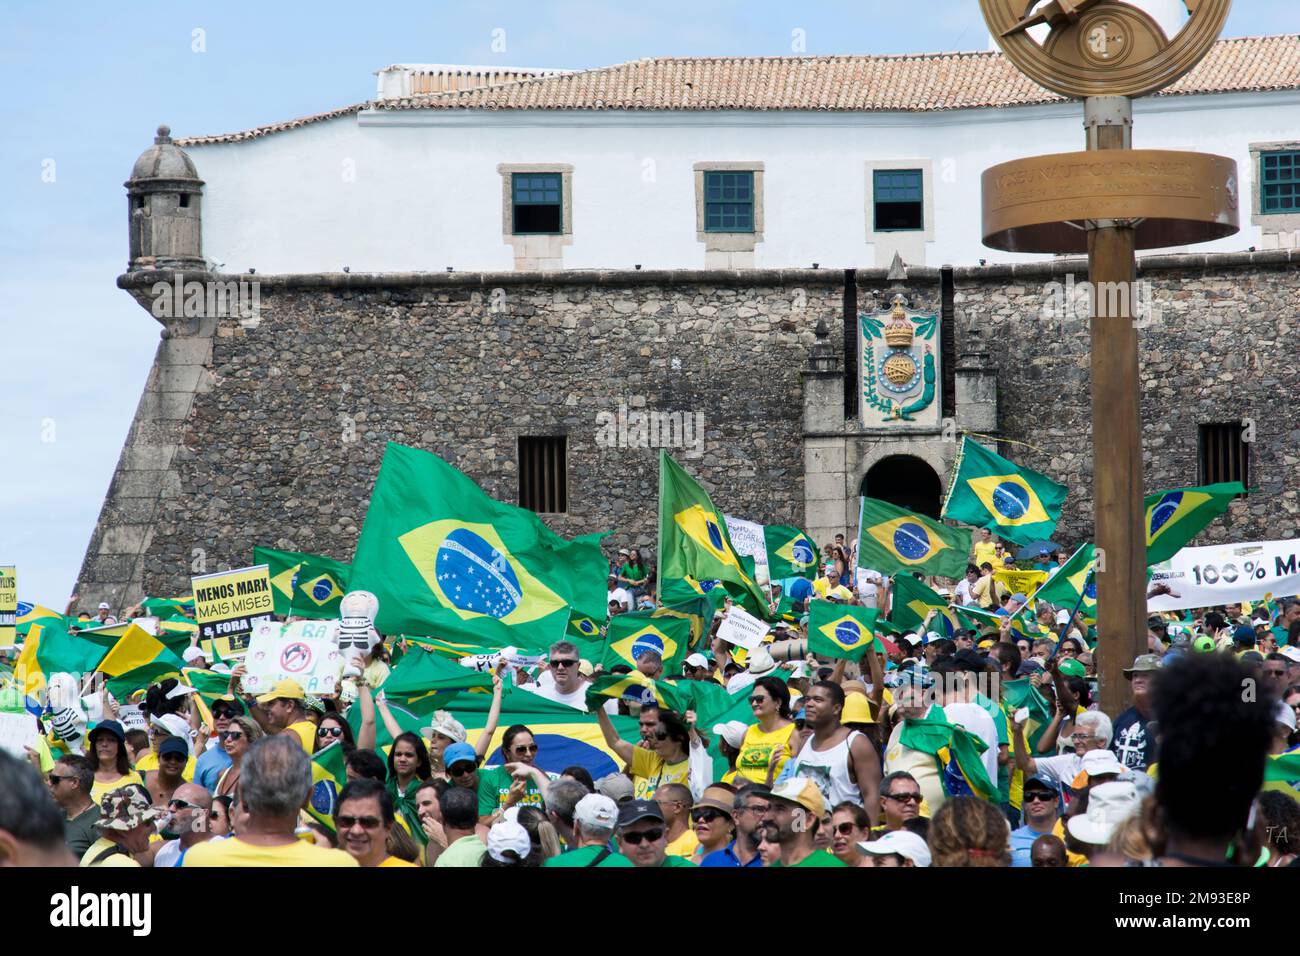 Salvador, Bahia, Brazil - March 13, 2016: A crowd of protesters with Brazilian flags demanding the impeachment of Dilma Rousseff Stock Photo